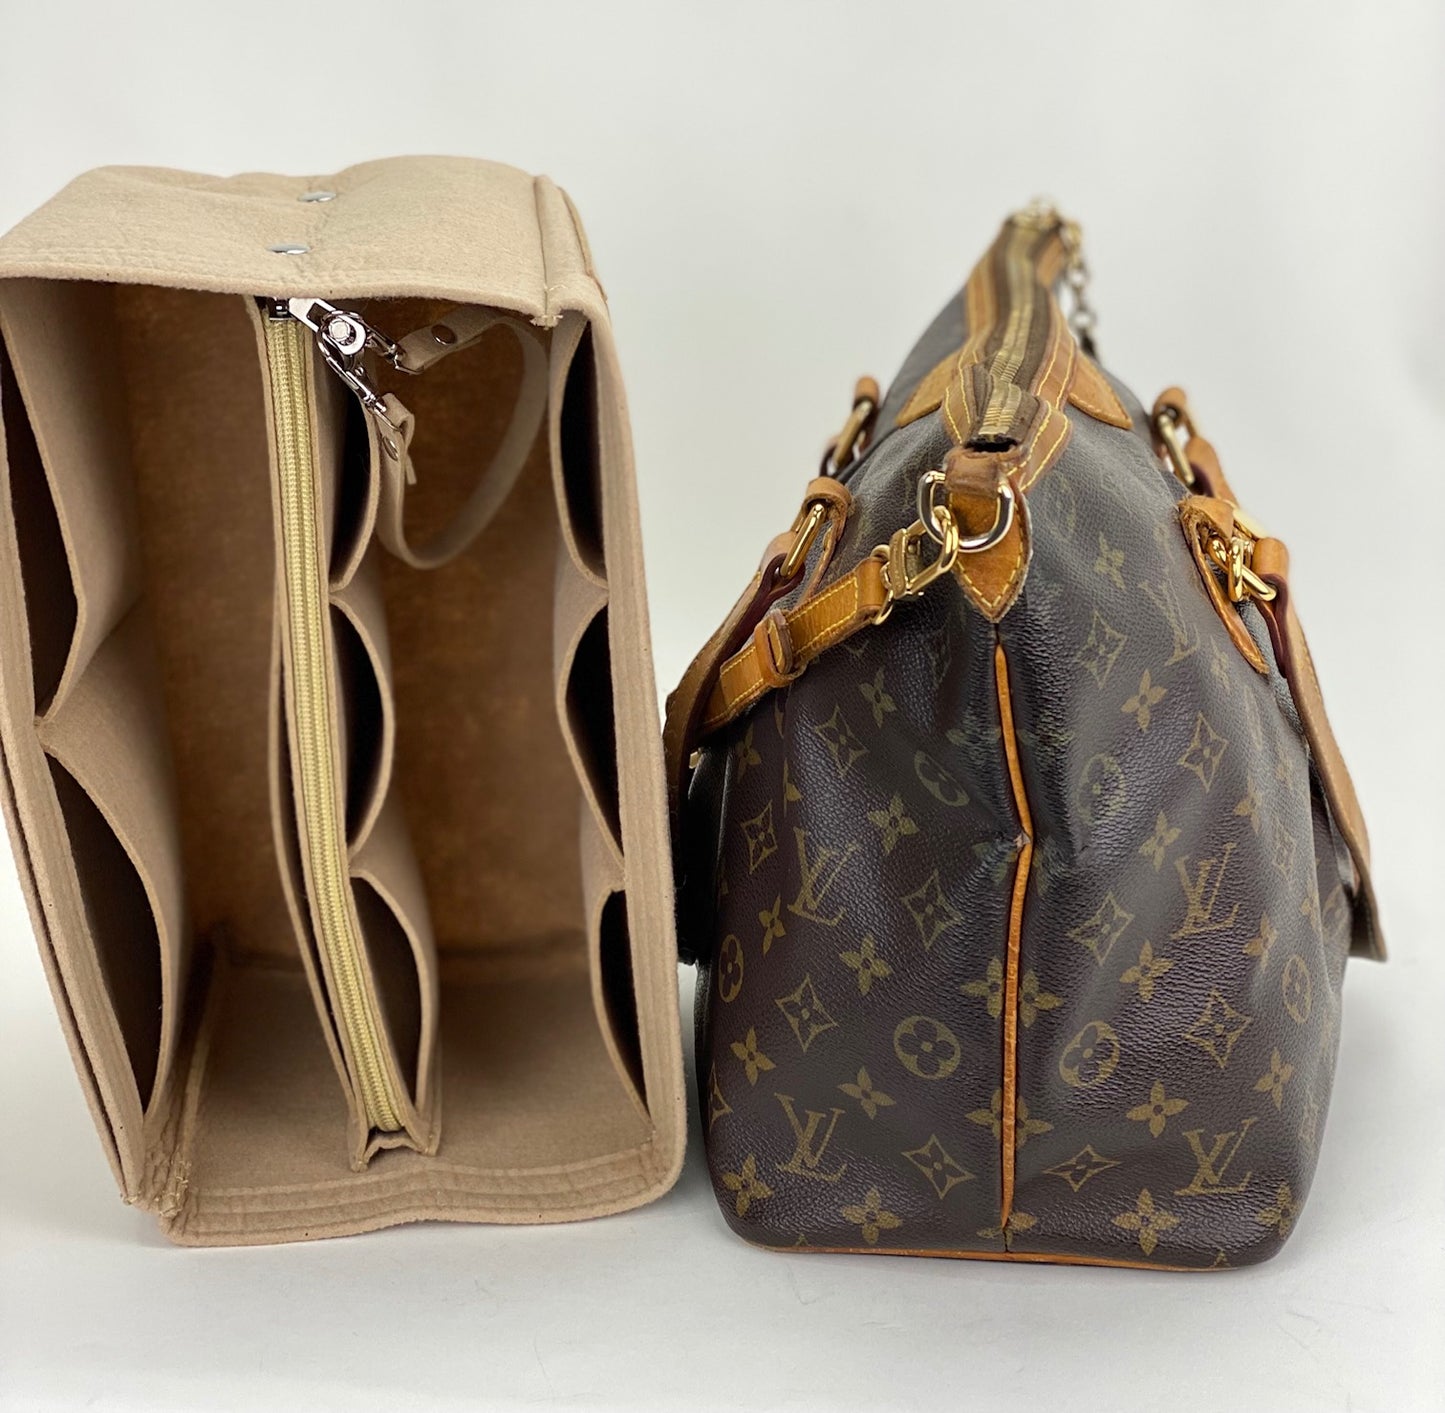 Two is always better than one! This Louis Vuitton Palermo is one